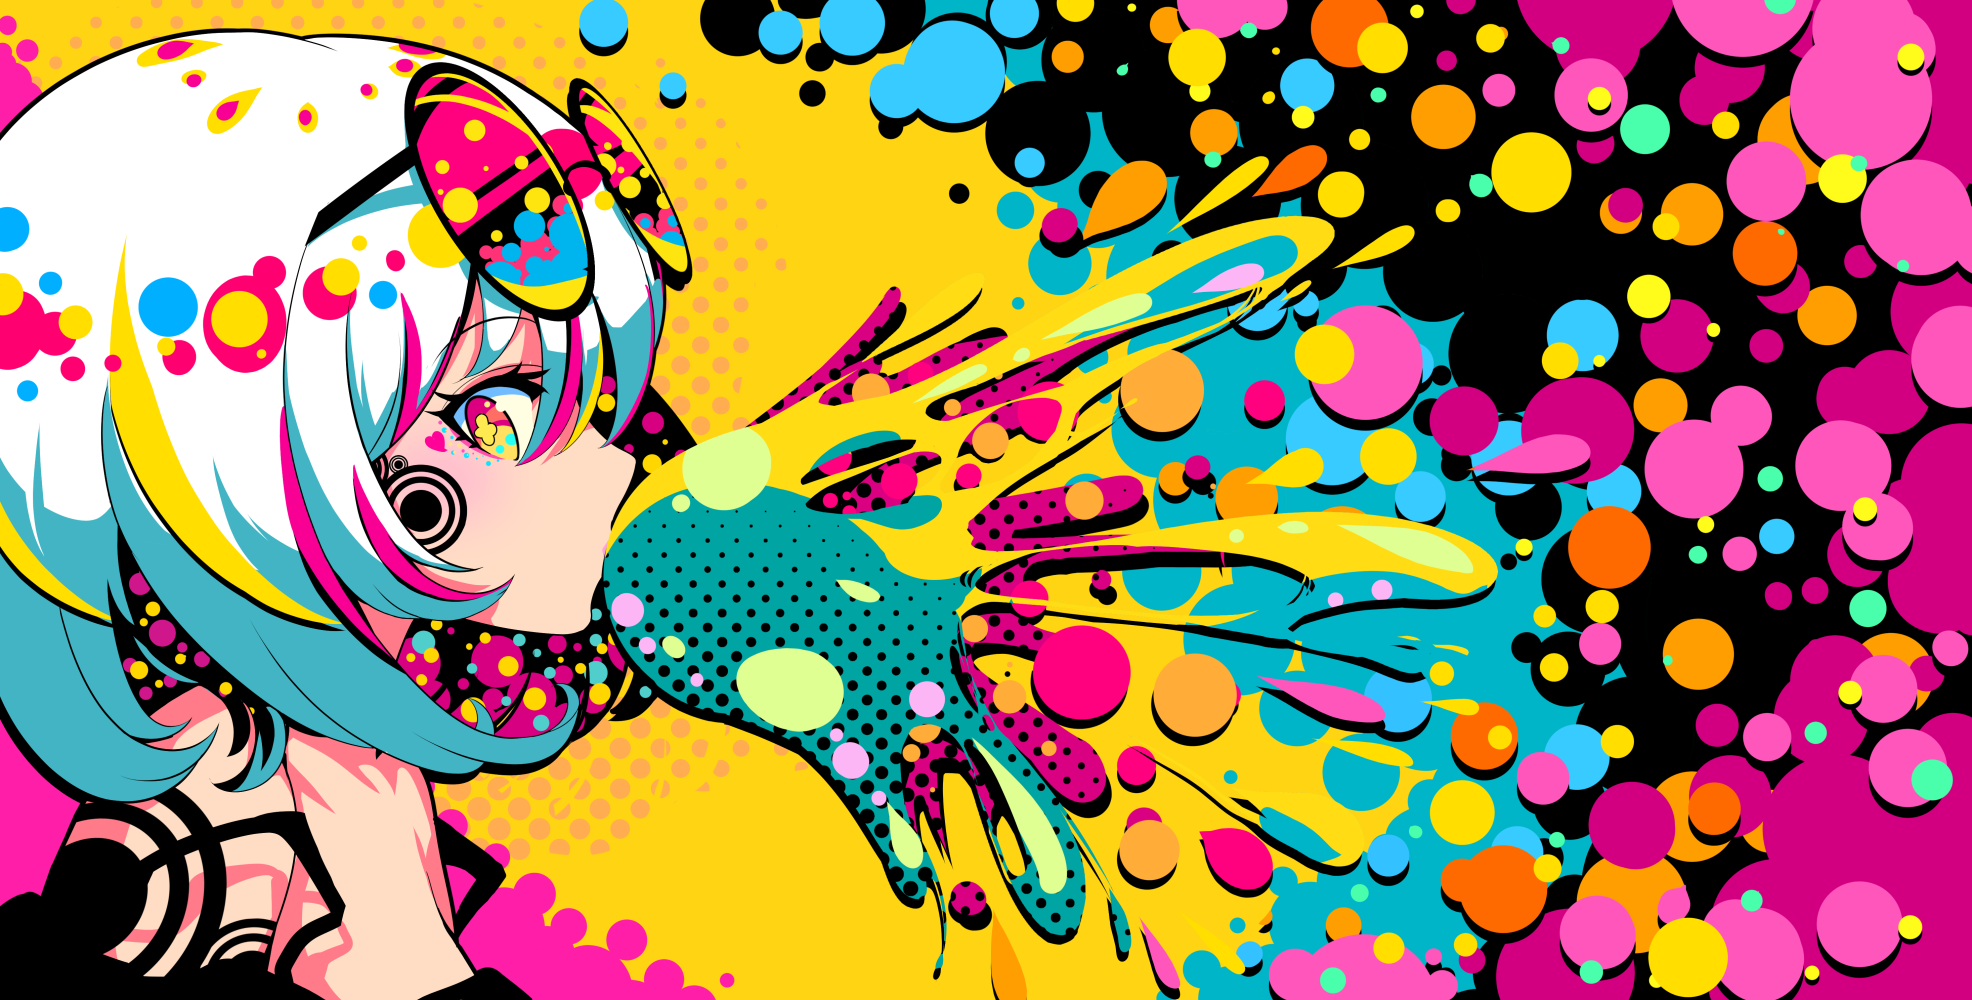 Original Characters Anime Anime Girls Profile Psychedelic Sunglasses Looking At Viewer Bubble Gum Pa 1972x1000